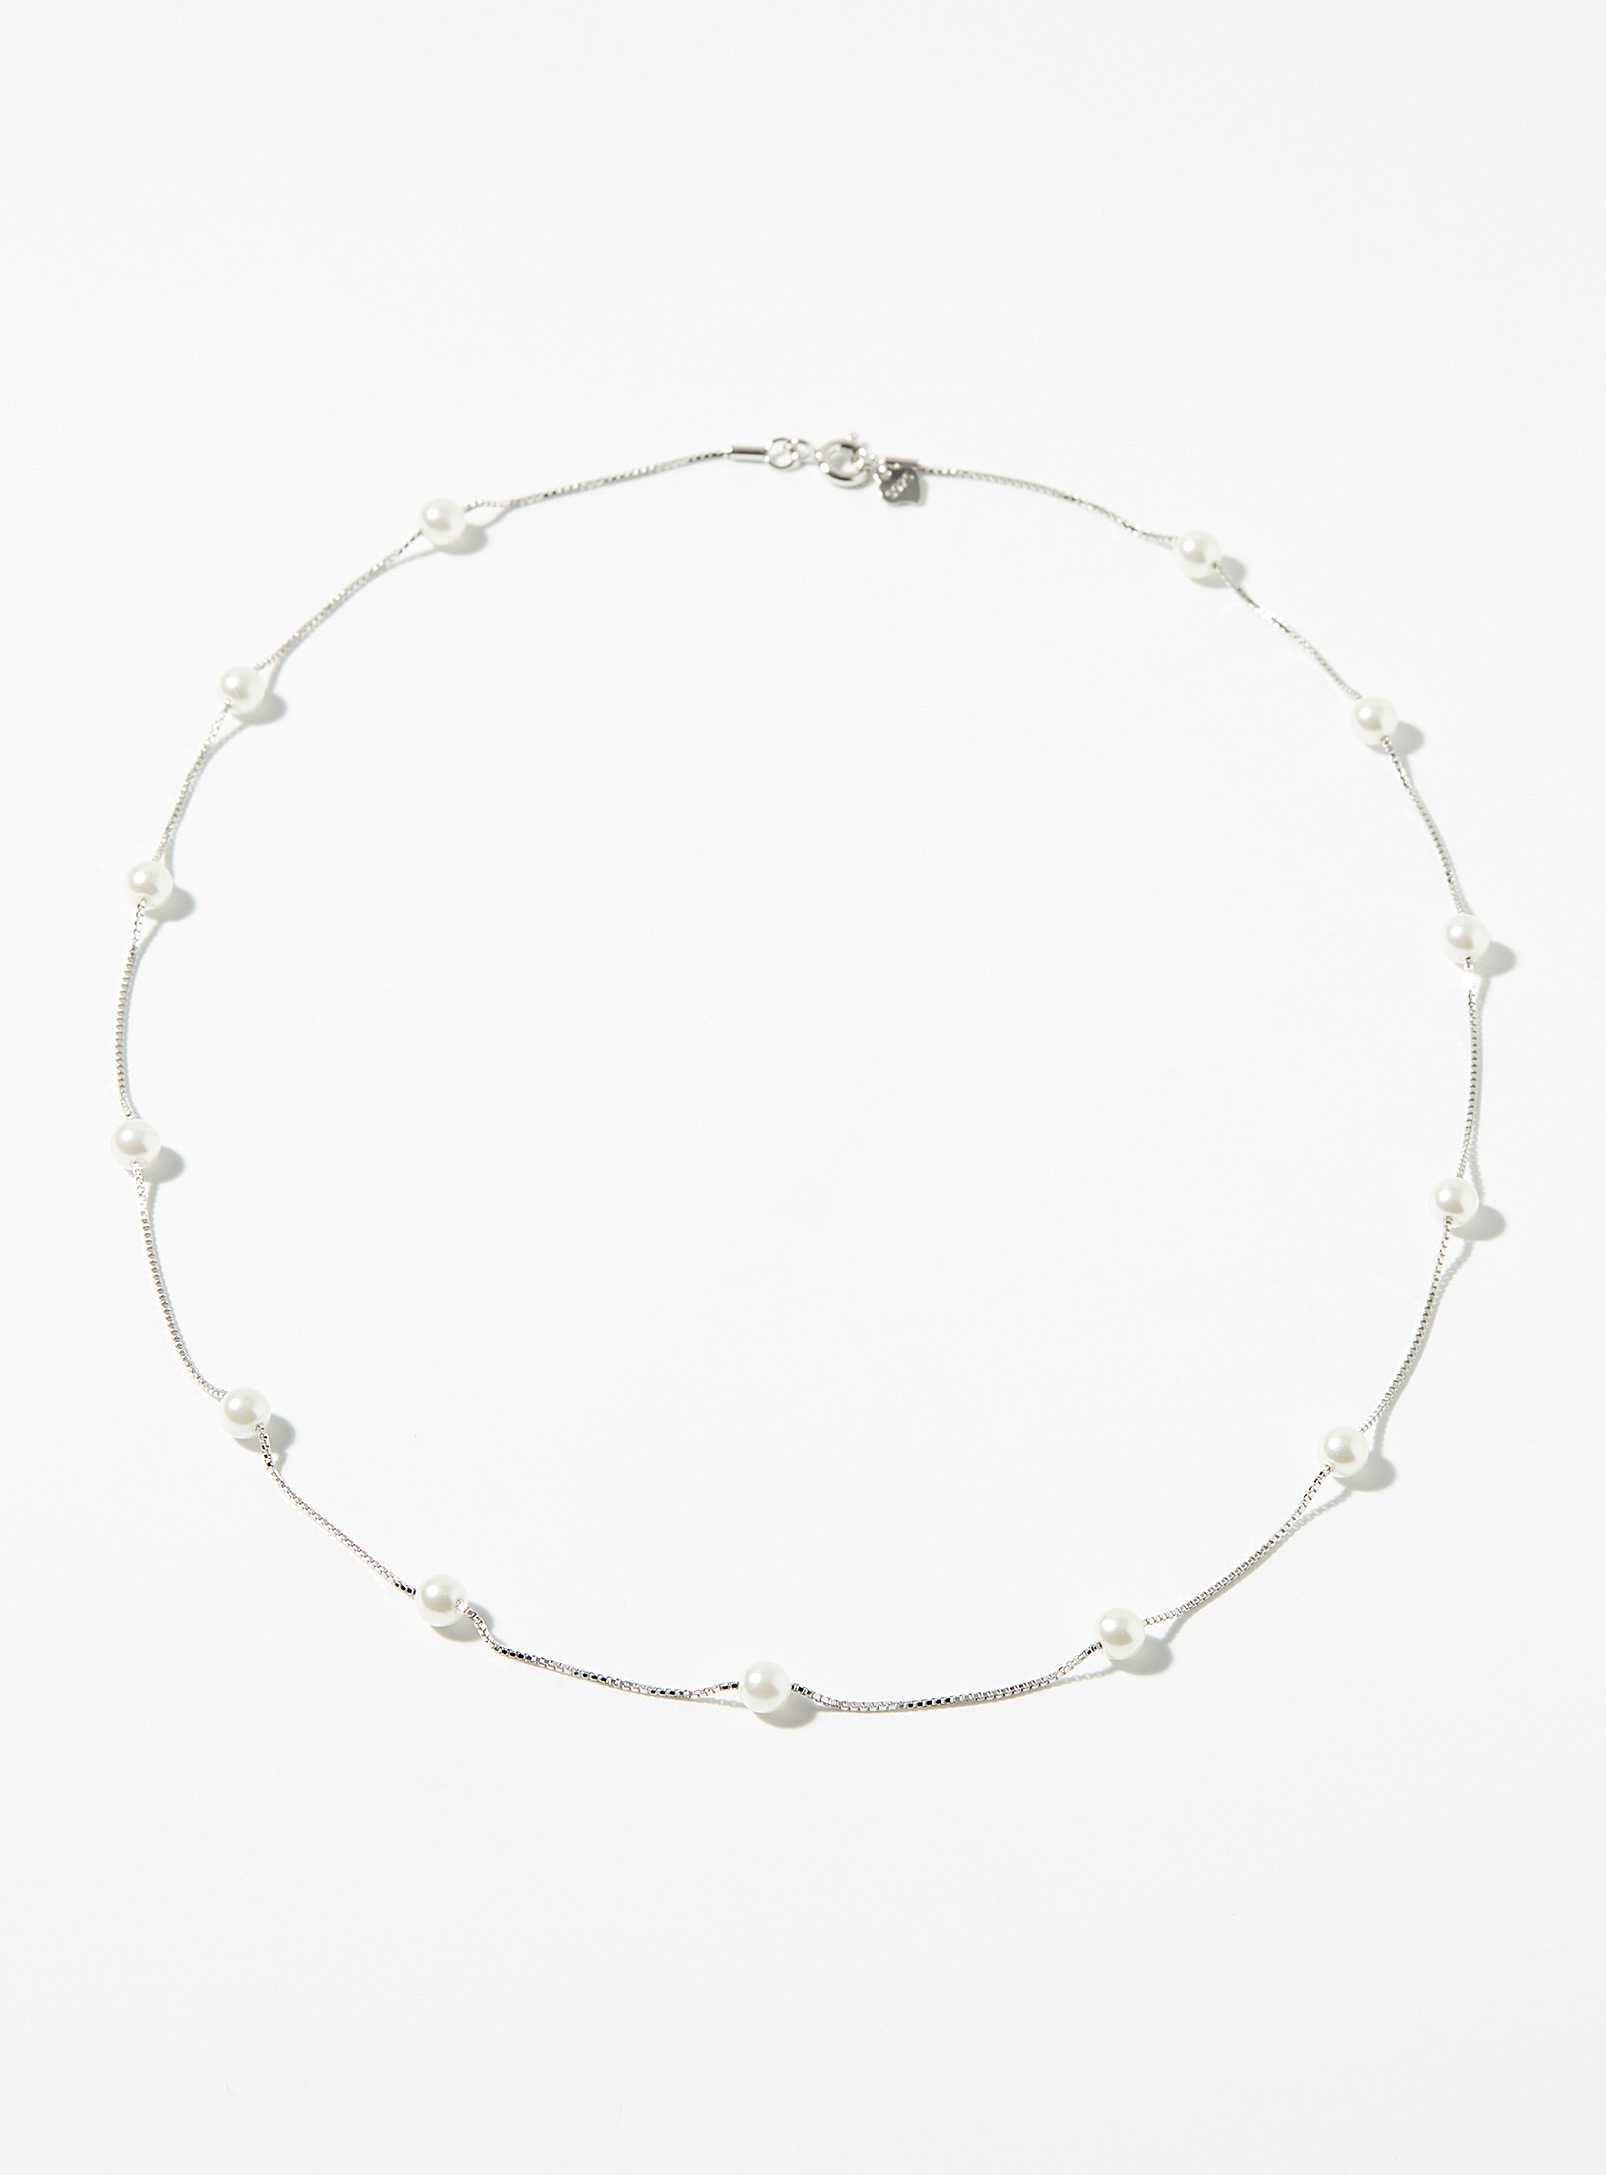 Simons - Women's Pearly bead silver chain